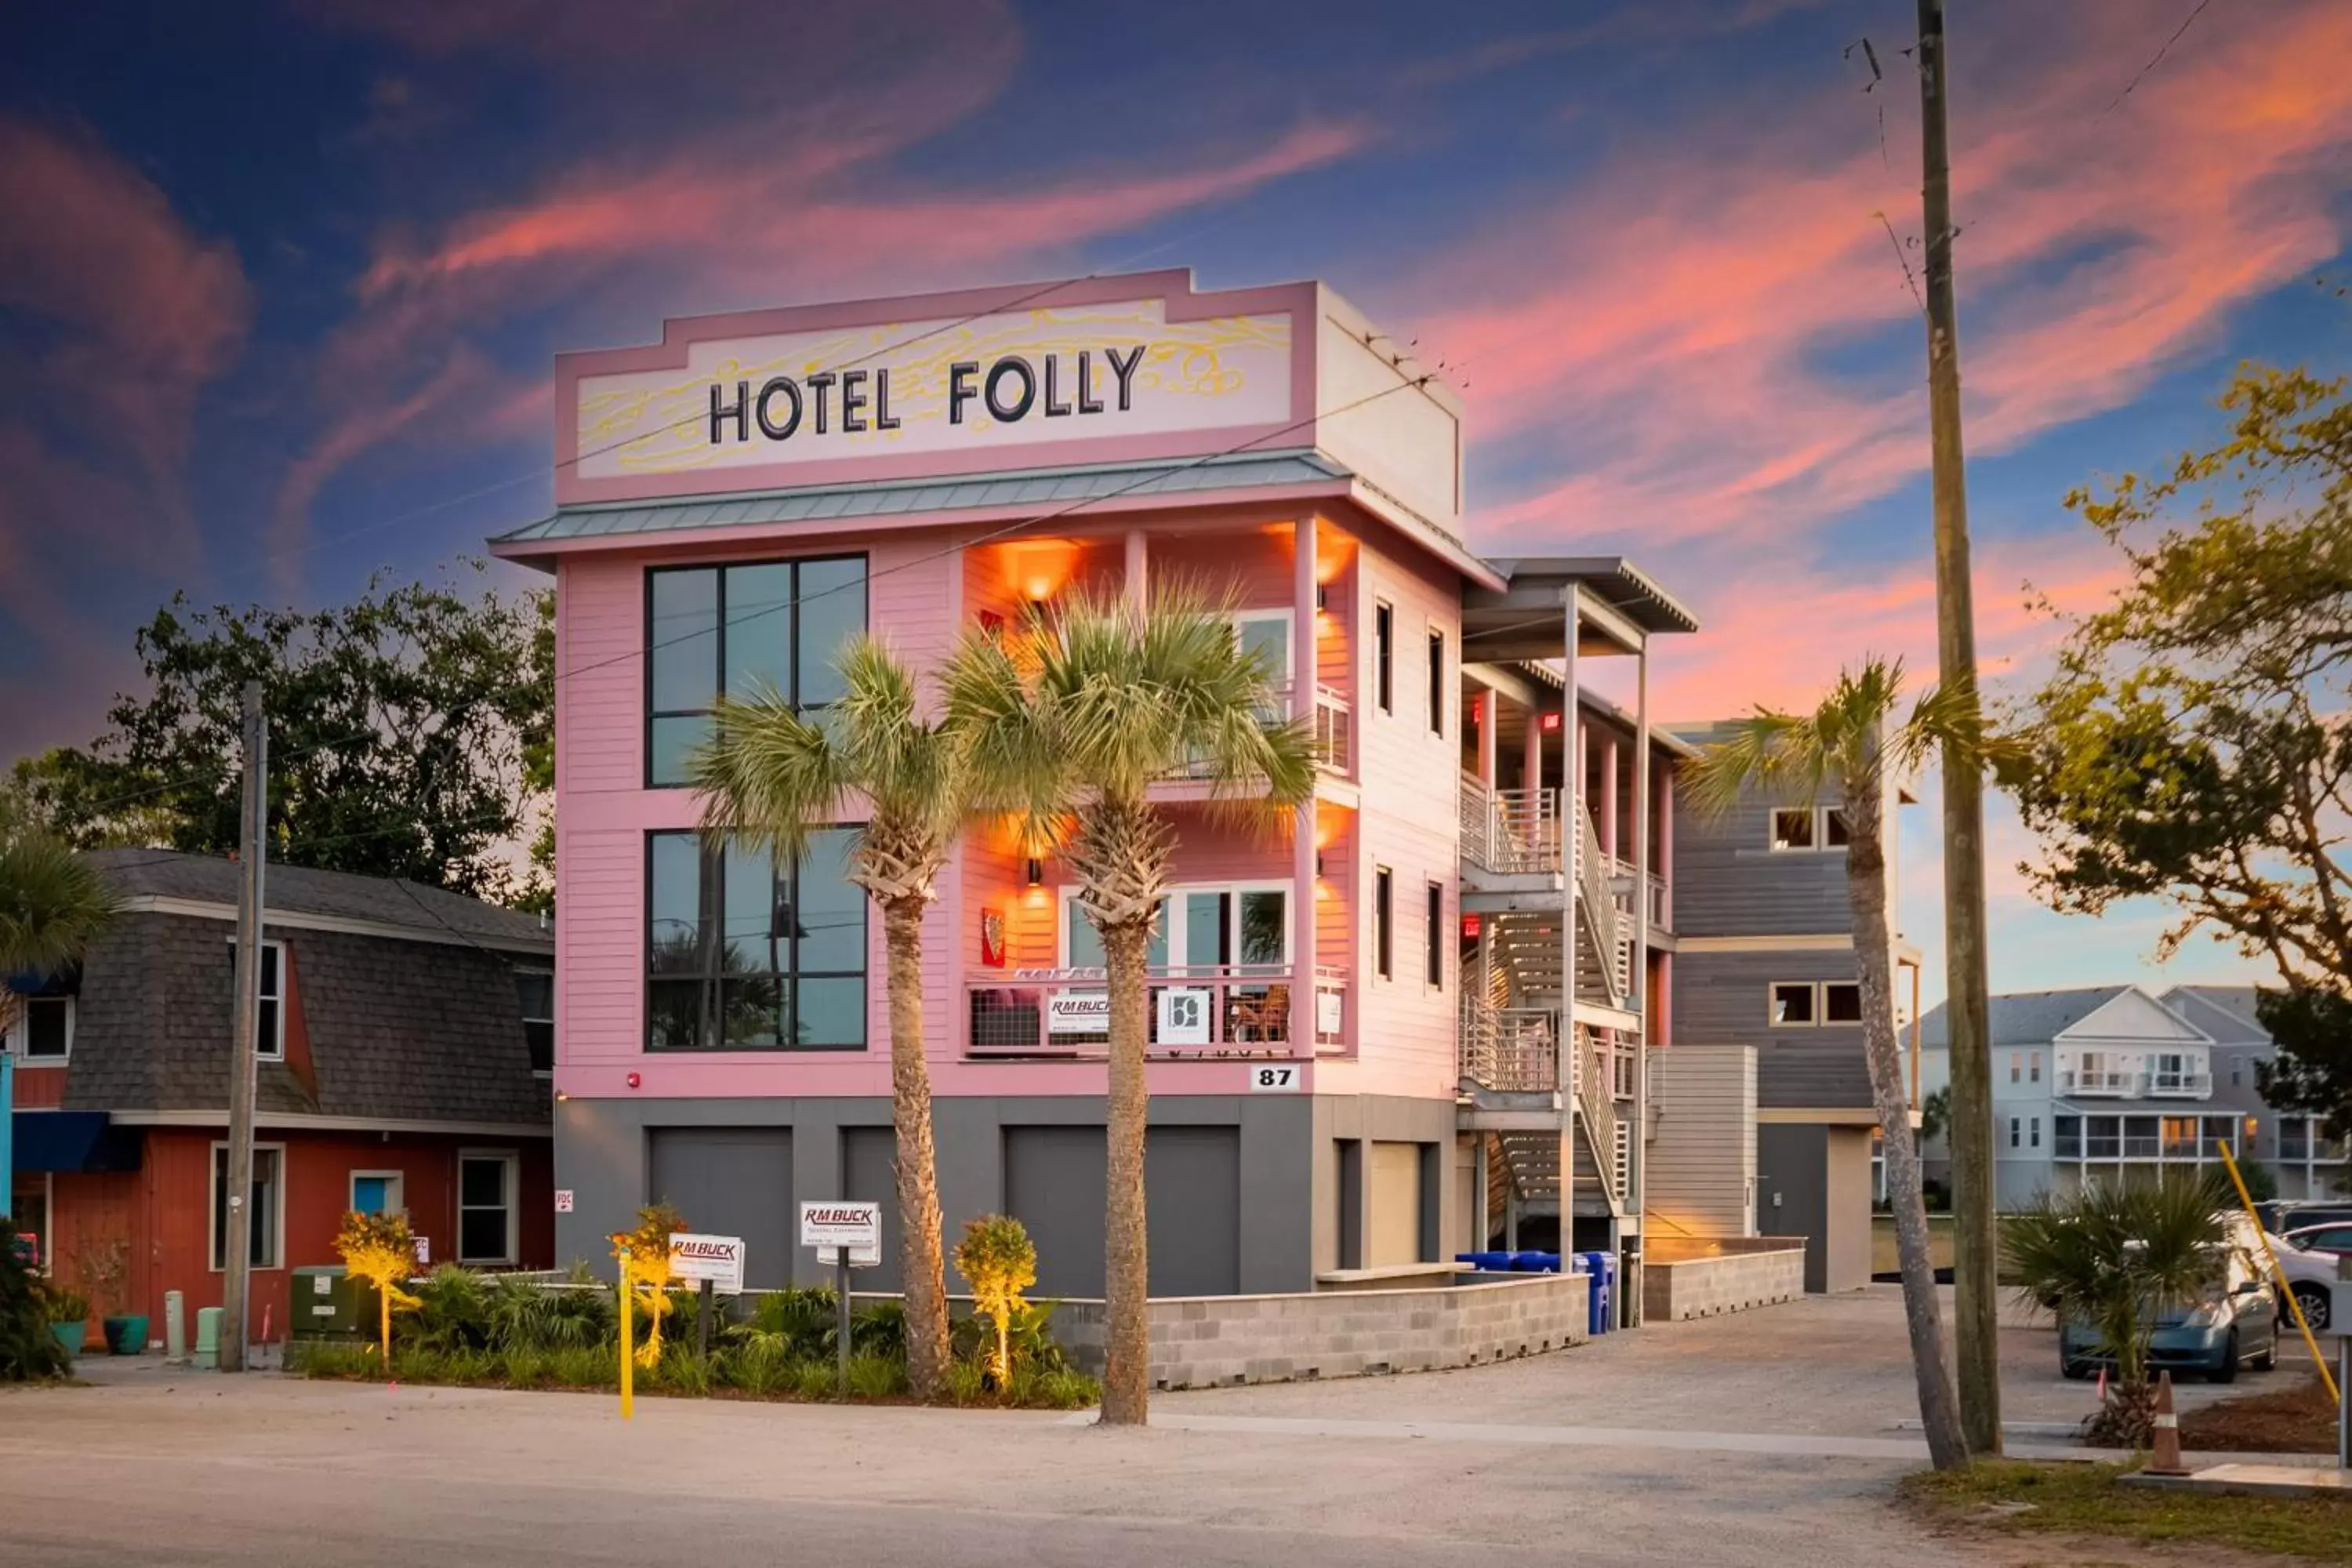 Property Building in NEW Completely Renovated Hotel Folly with Sunset Views